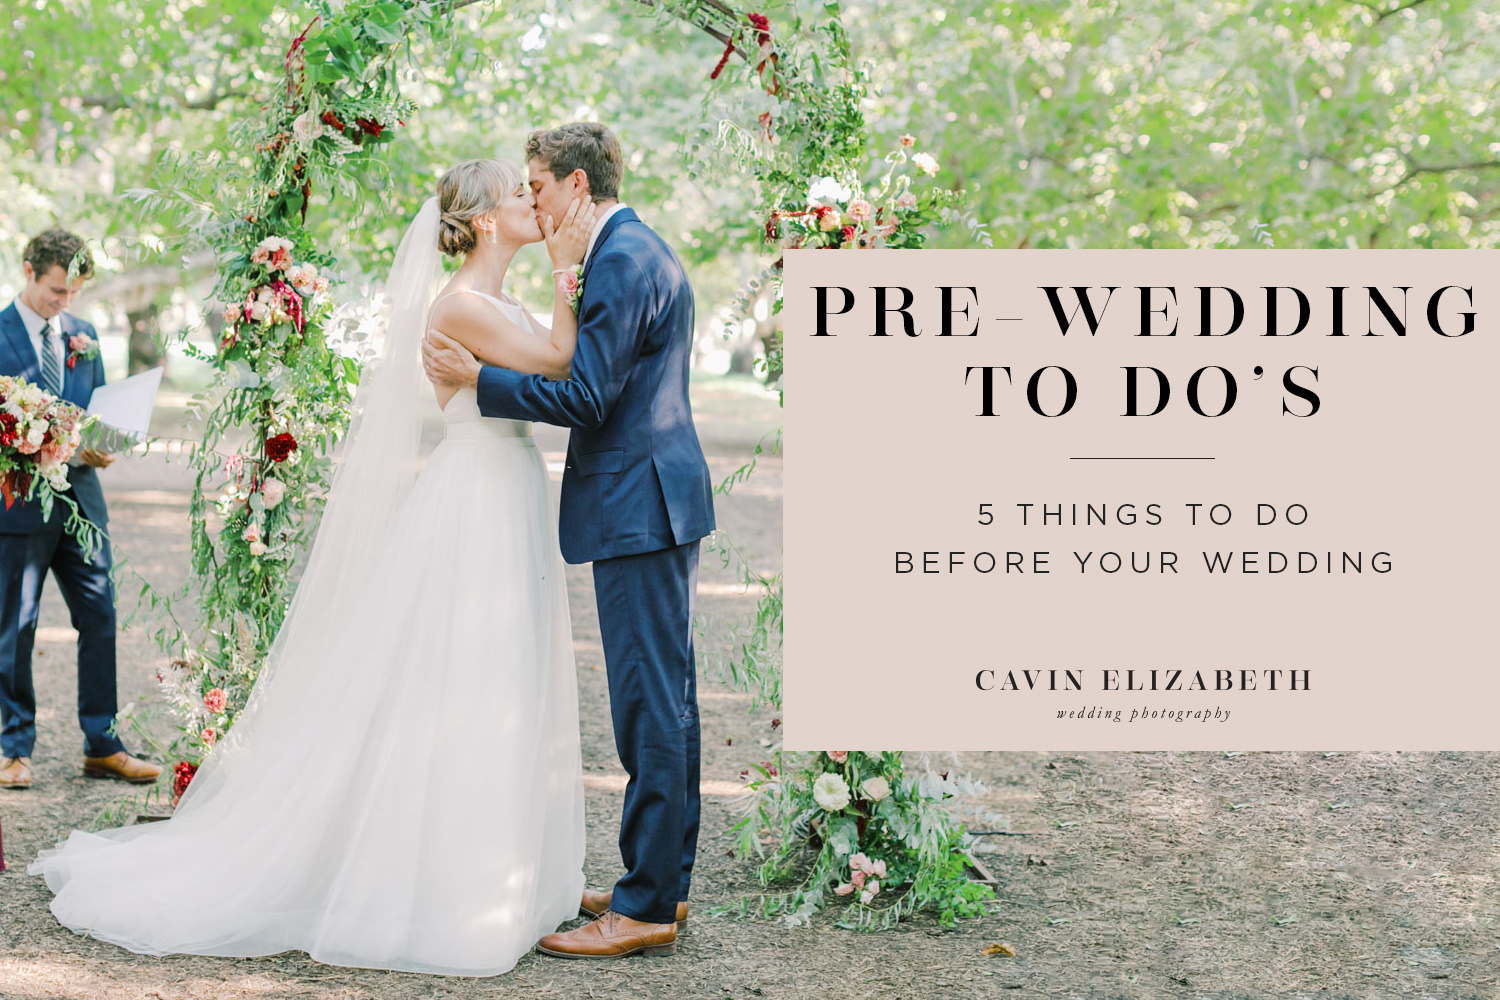 5 Things to Do Before Your Wedding